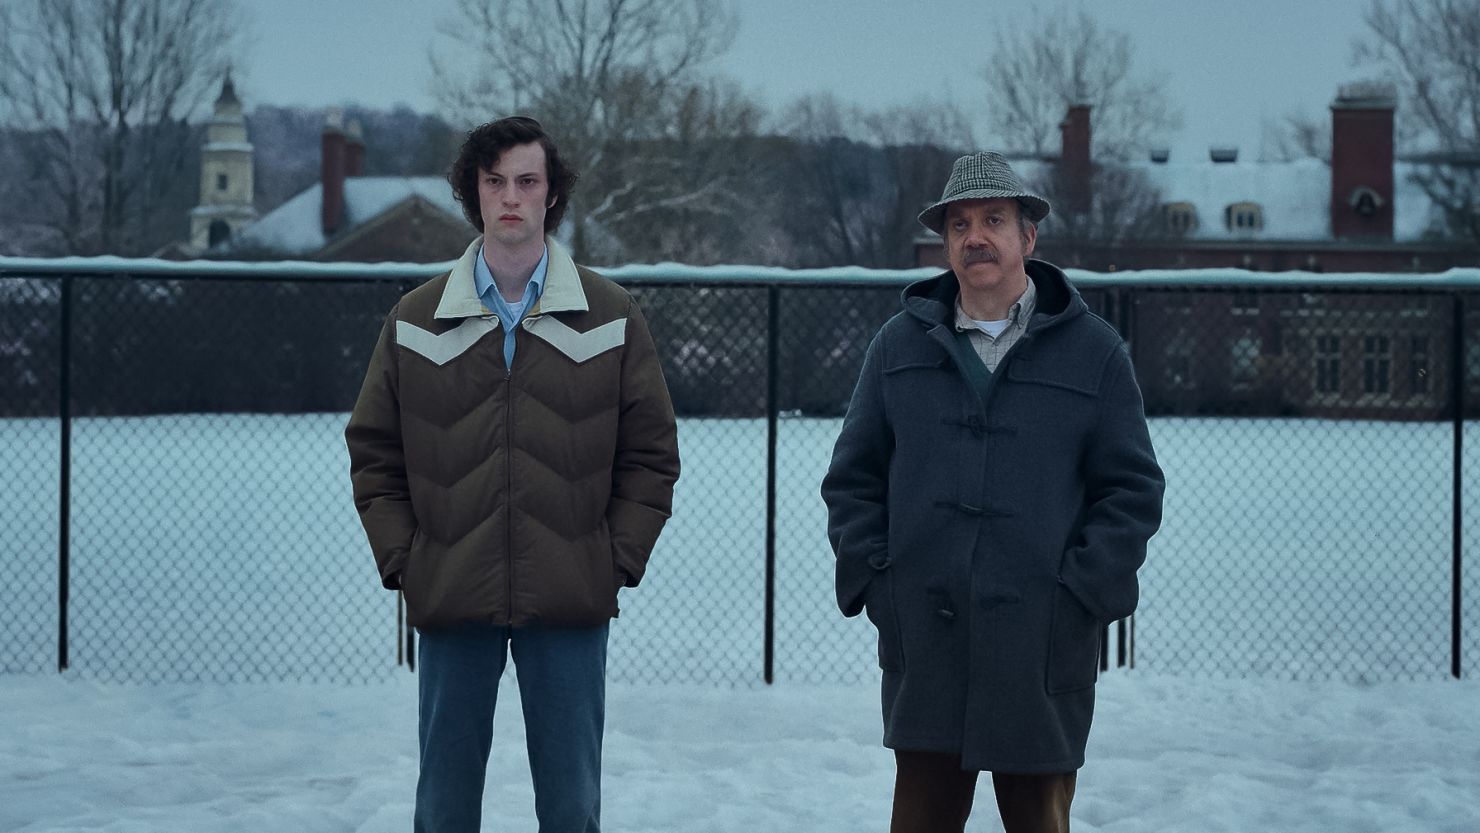 Dominic Sessa stars as Angus Tully and Paul Giamatti as Paul Hunham in director Alexander Payne's THE HOLDOVERS, a Focus Features release.